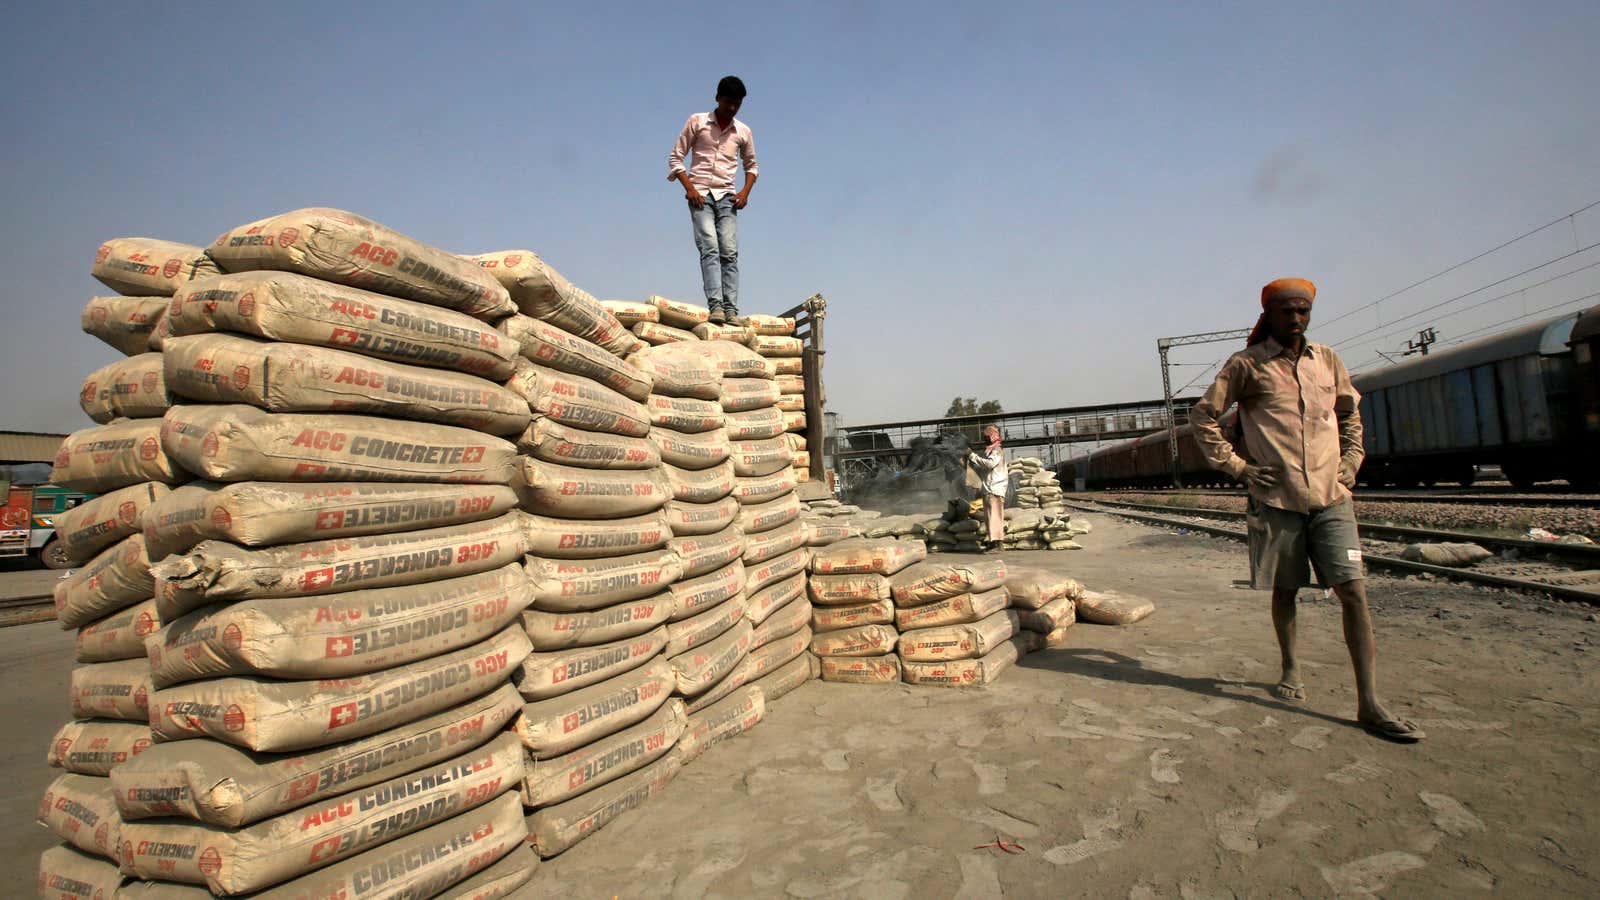 RBI wants India's cement industry to use green tech